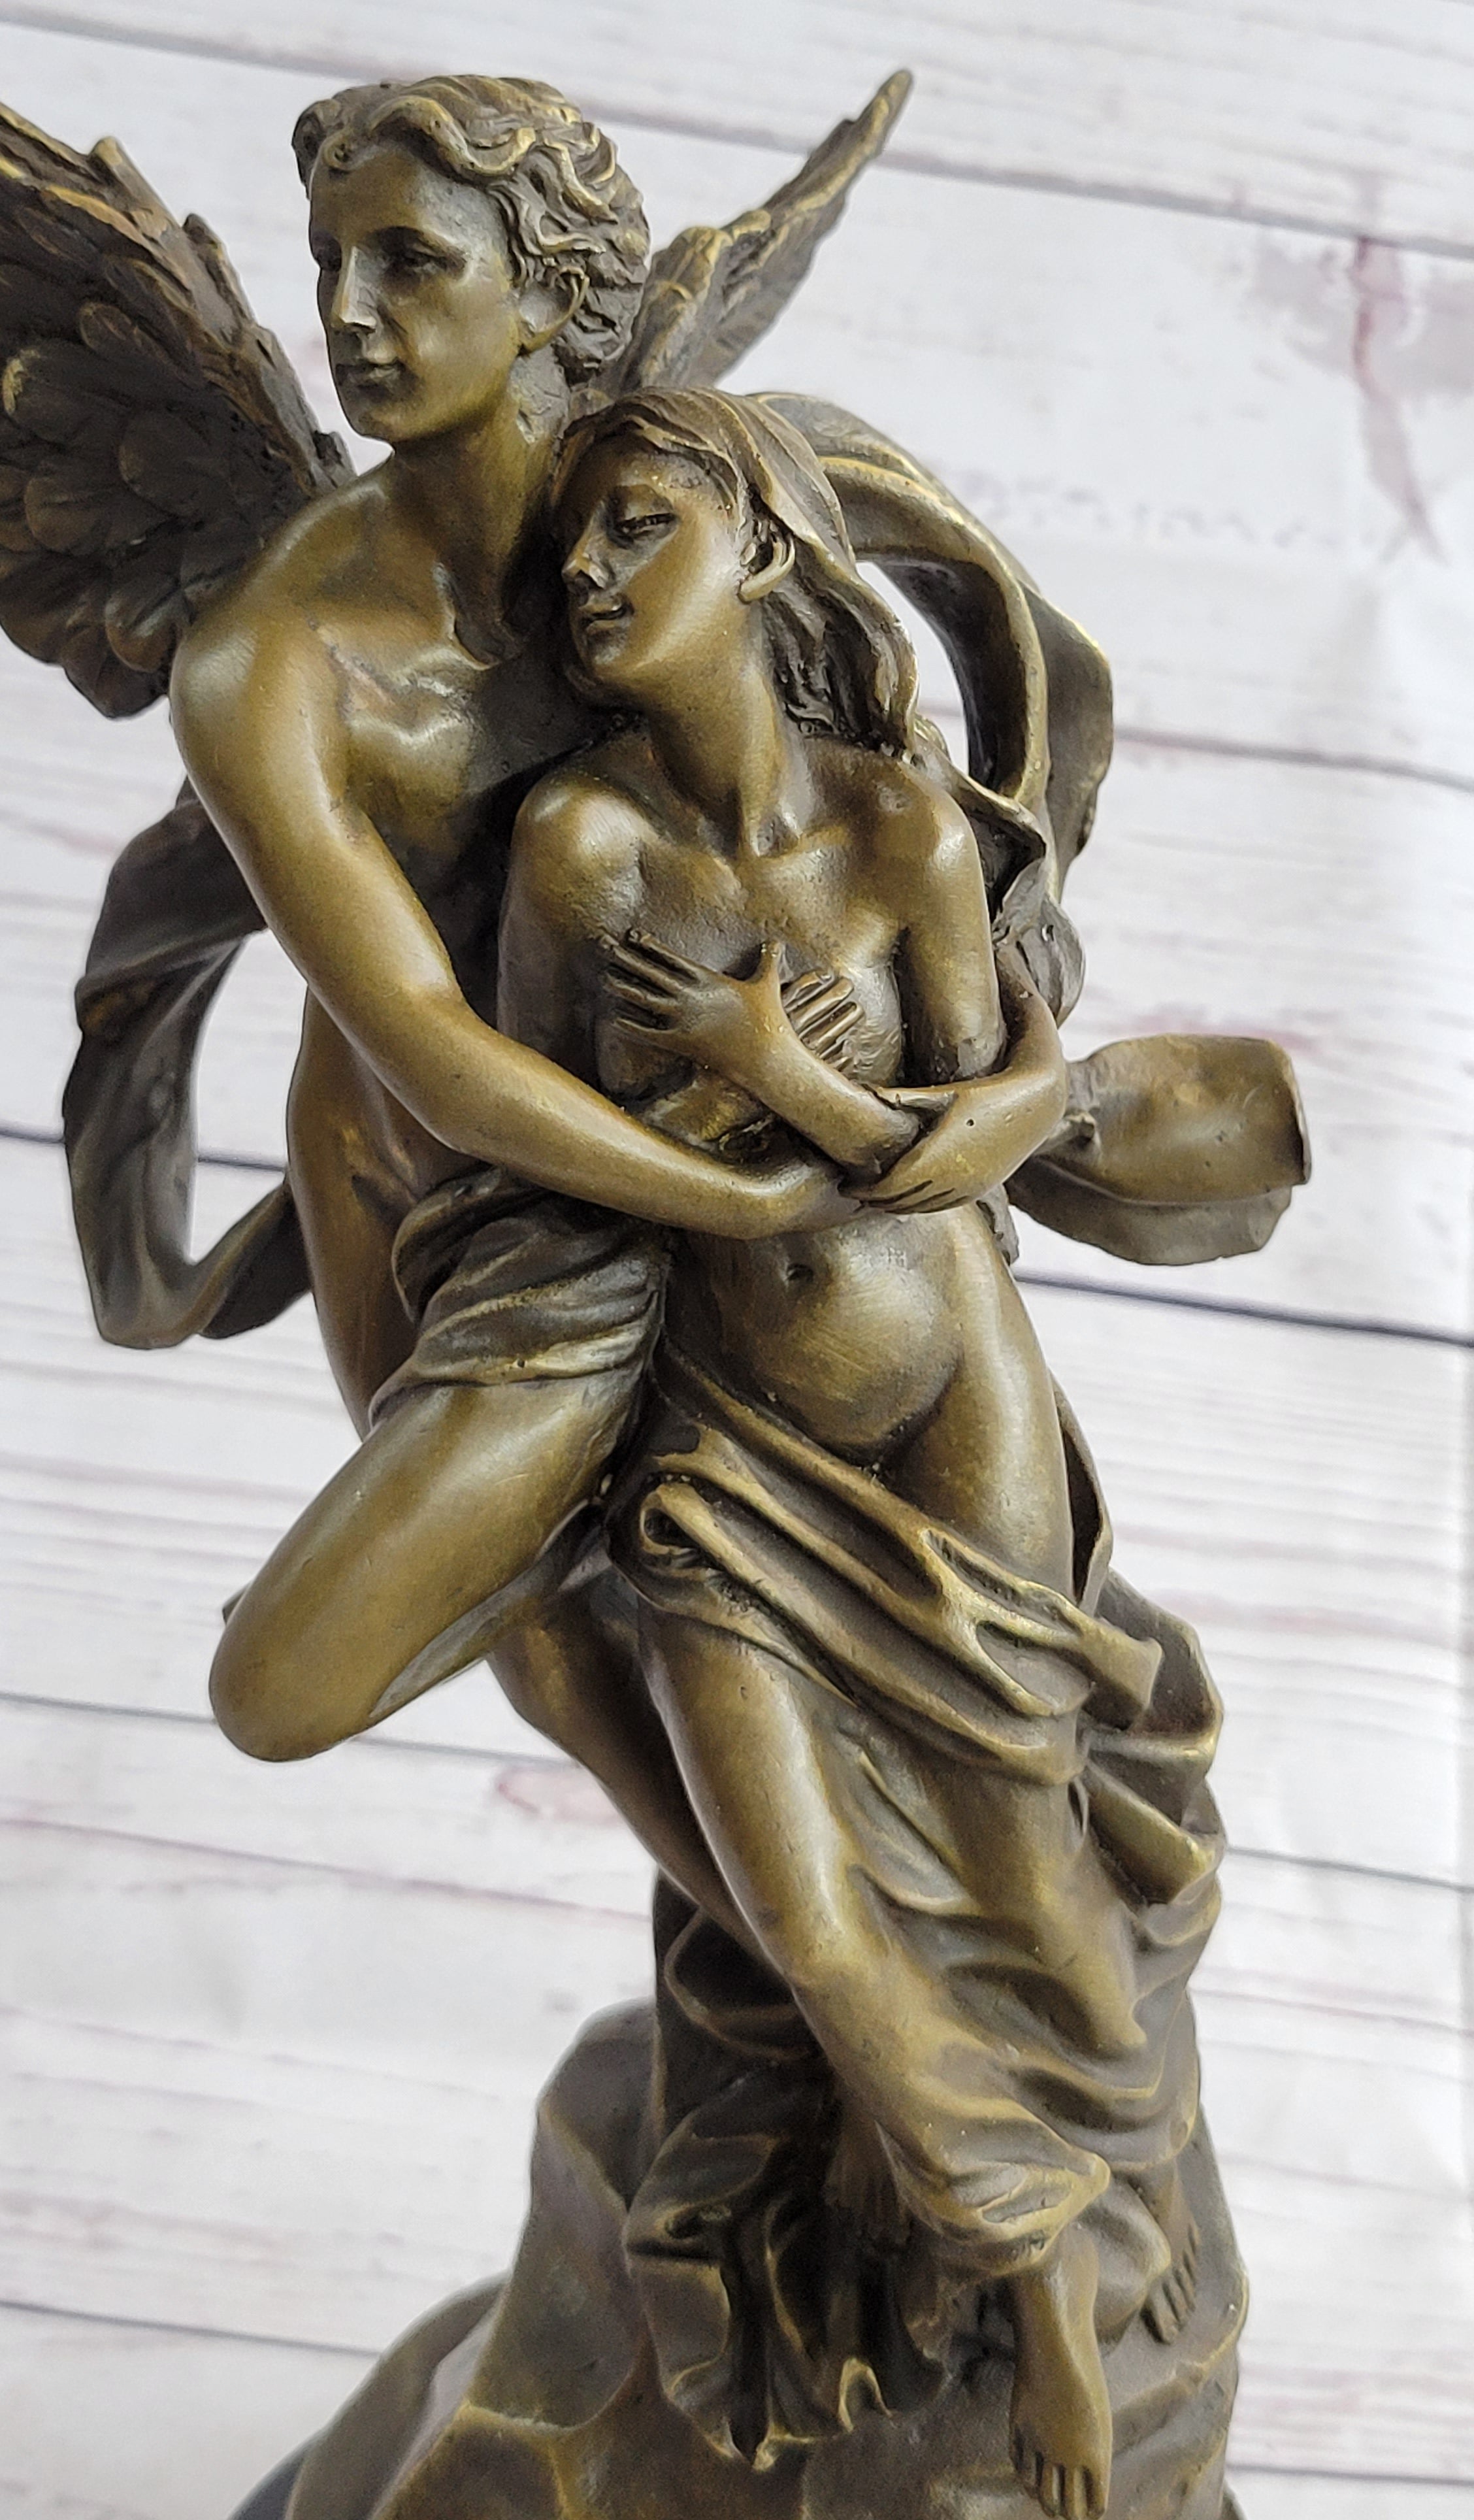 Bronze Sculpture Eros and Psyche For Valentine Day Gift Thoughtful Nude Figurine